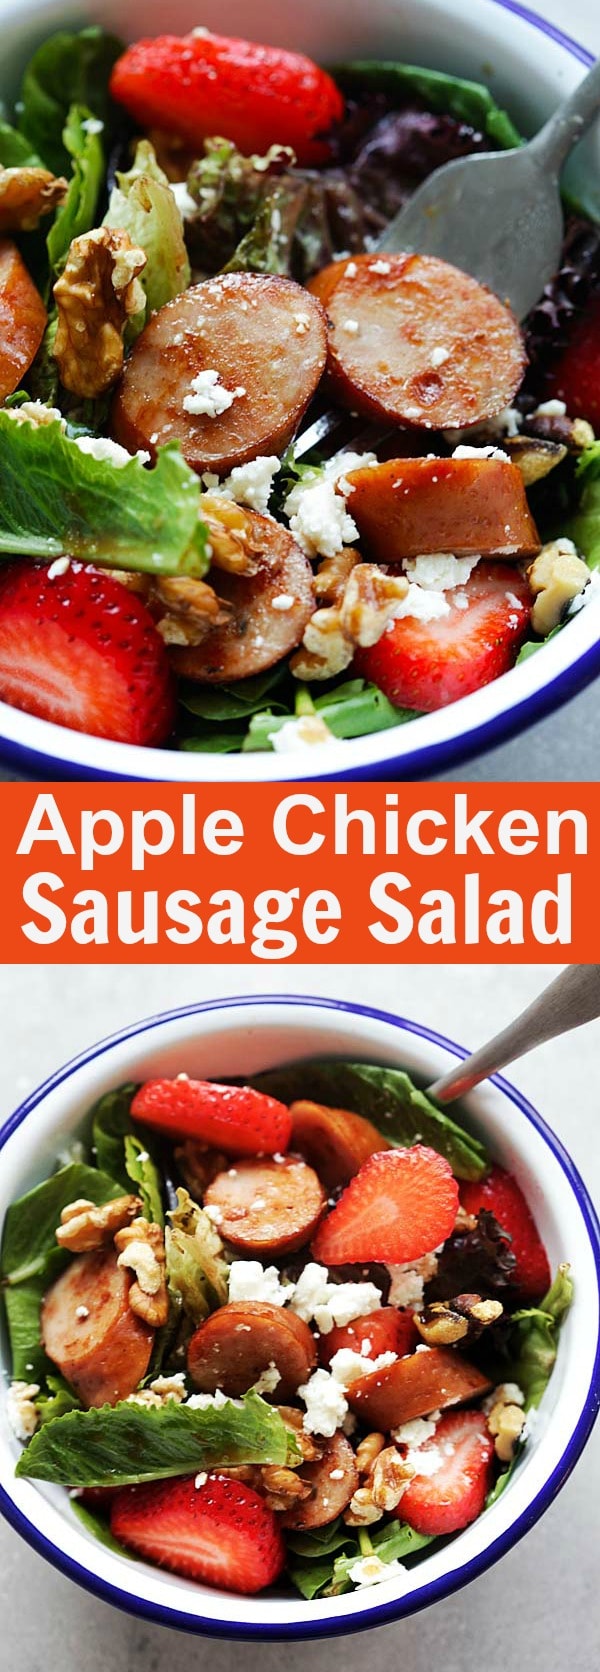 Apple Chicken Sausage Salad - healthy and refreshing salad loaded with apple chicken sausage, so good that even the pickiest eater loves it | rasamalaysia.com